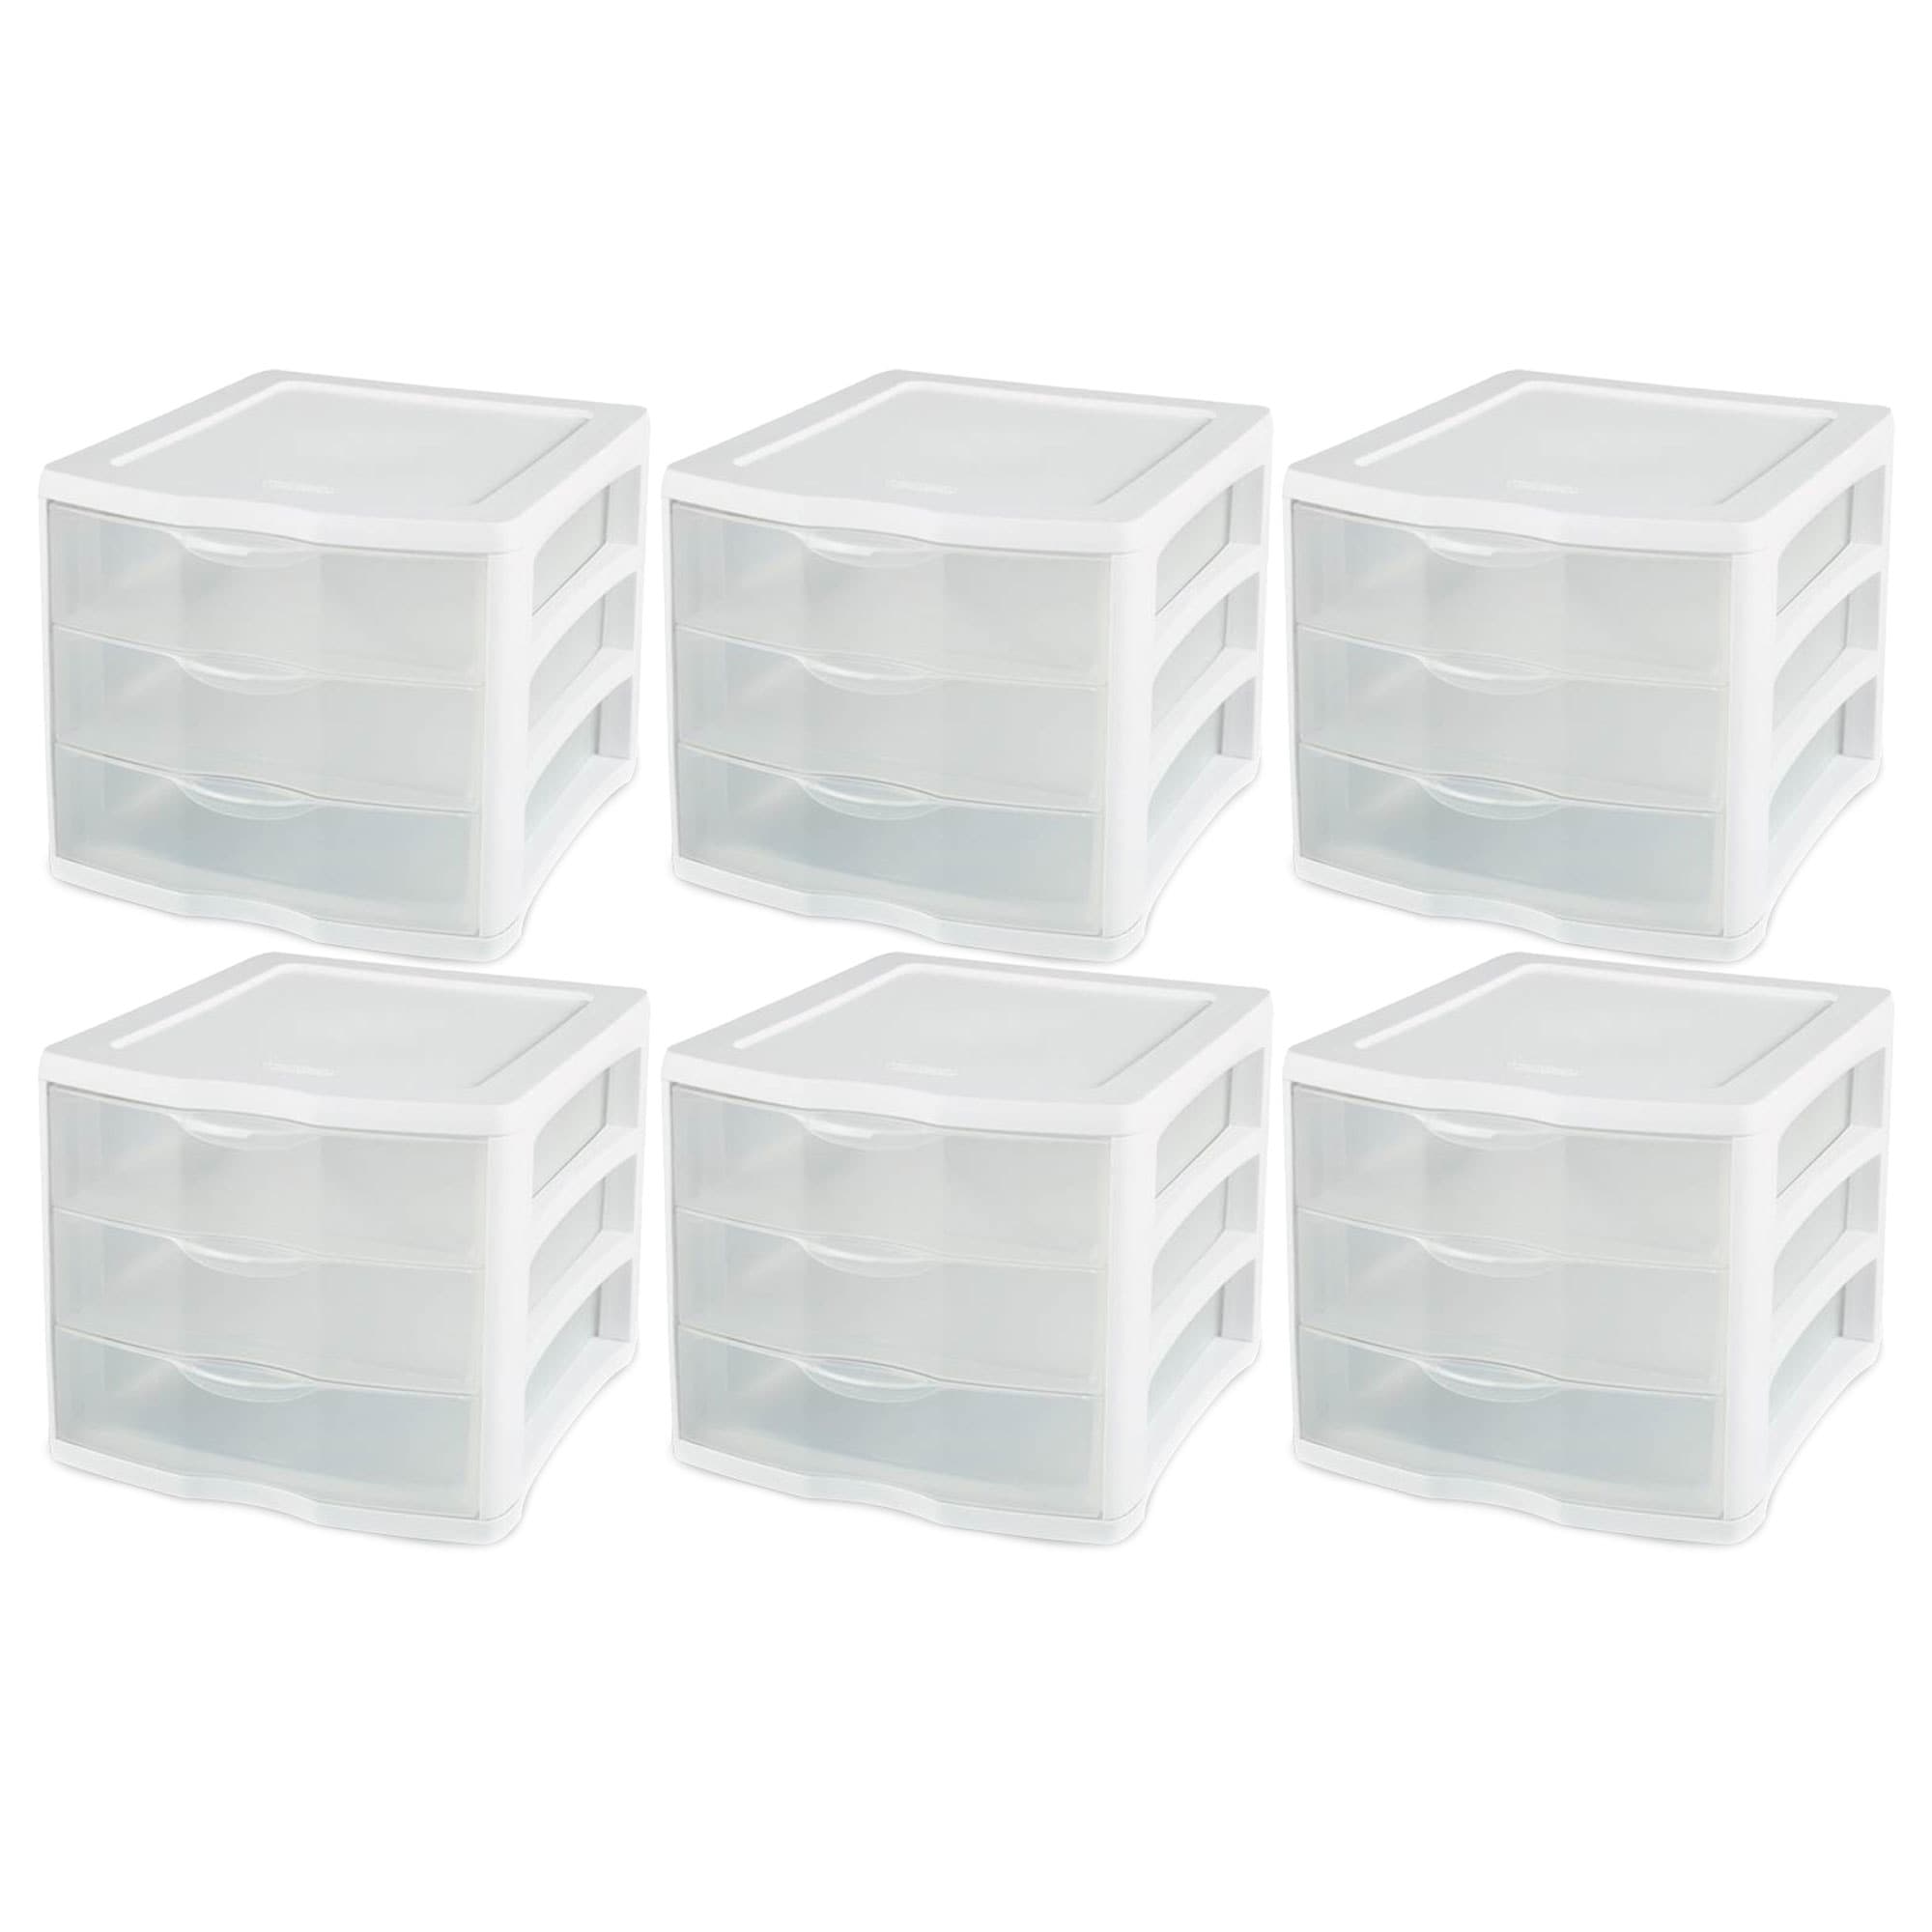 https://ak1.ostkcdn.com/images/products/is/images/direct/9ea3aef0f8b1c7a336aeca4504d974b0dad24d9c/Sterilite-Clear-Plastic-Stackable-Small-3-Drawer-Storage-System%2C-White%2C-%286-Pack%29.jpg